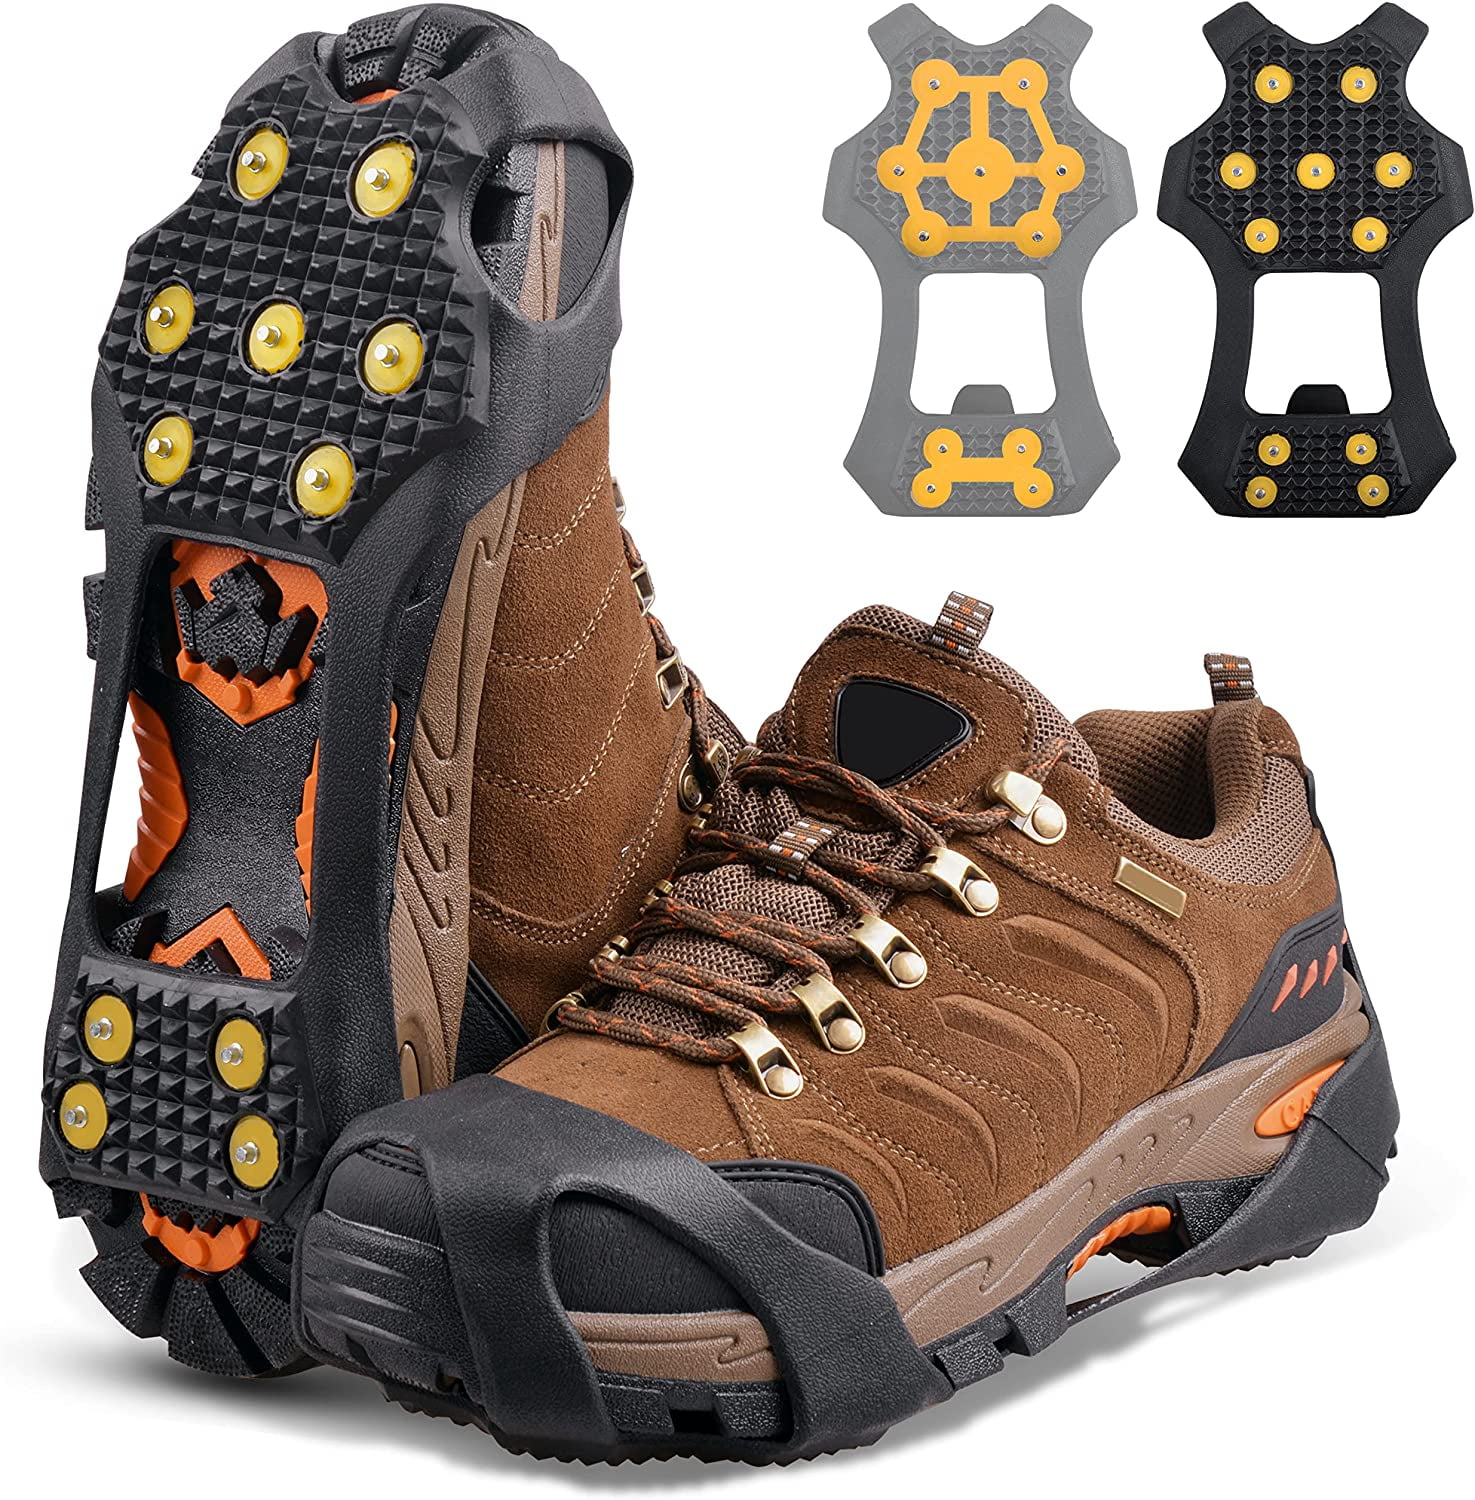 Ice Snow Cleats for Shoes and Boots,Walk Traction Cleats Crampons Anti ...